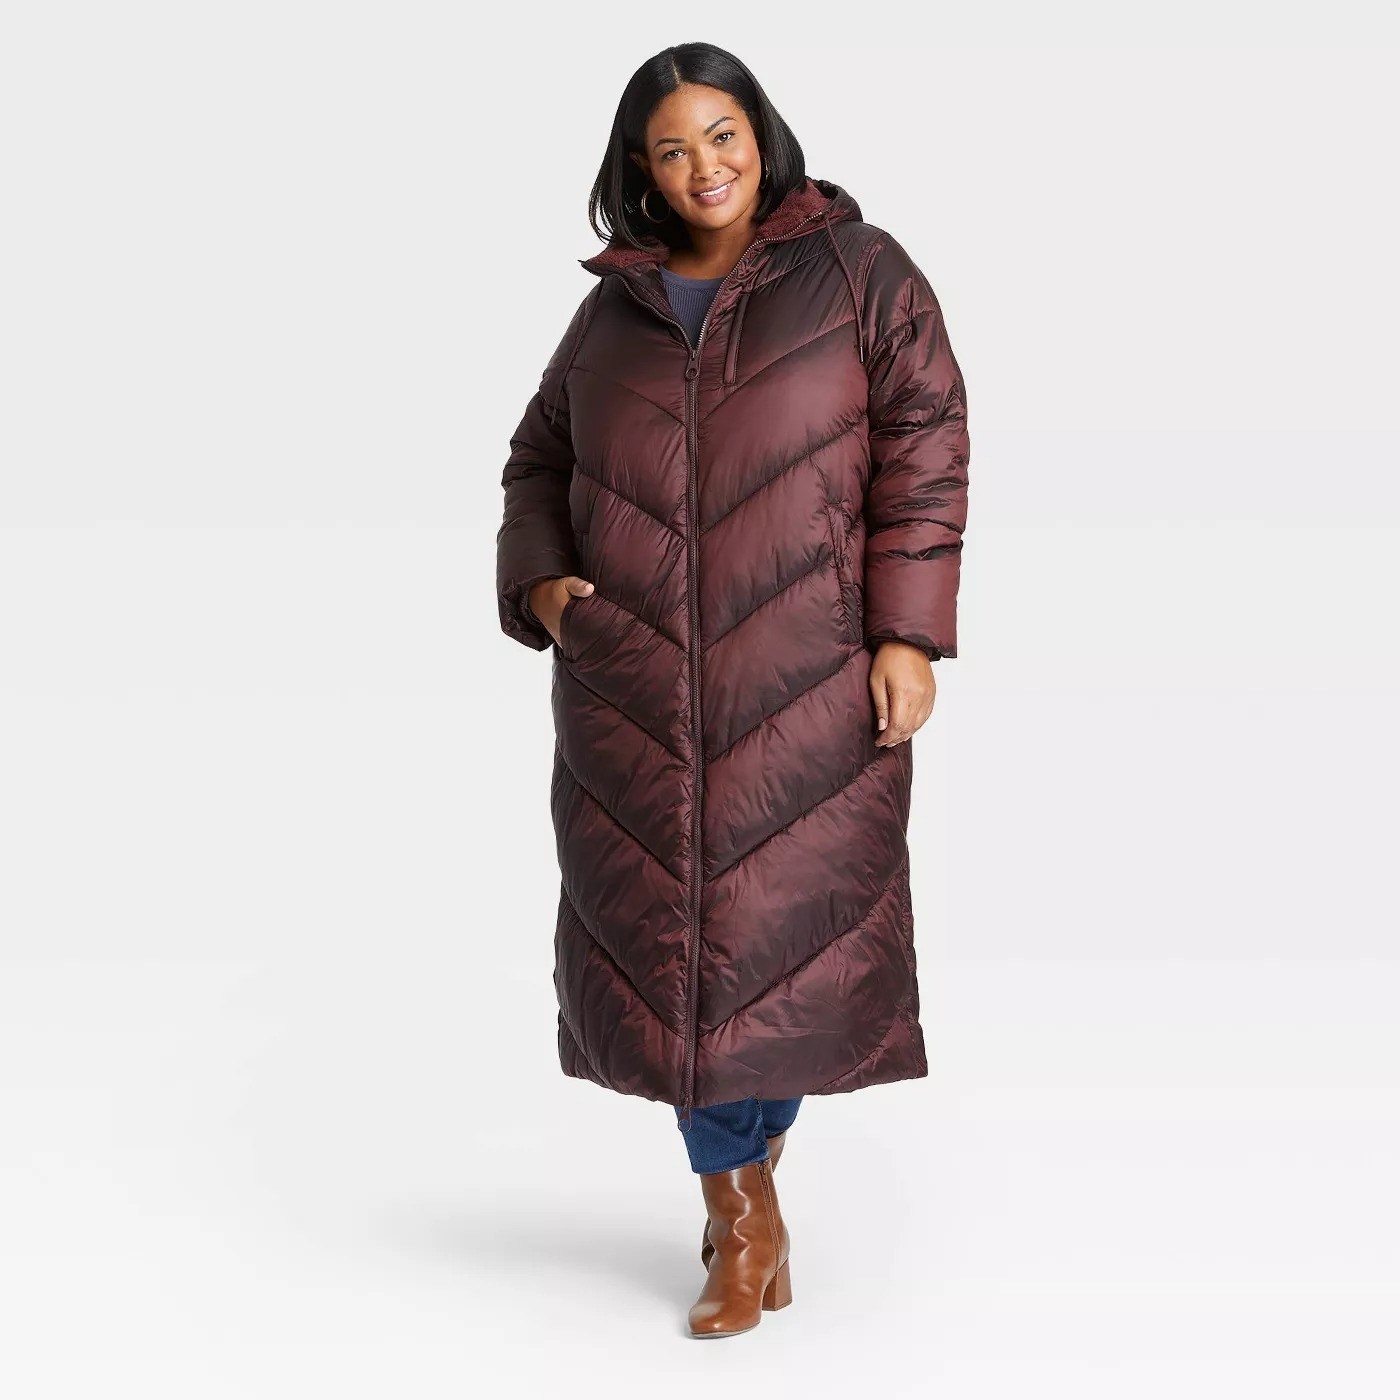 Model wearing burgundy coat with pockets, stops above the knee